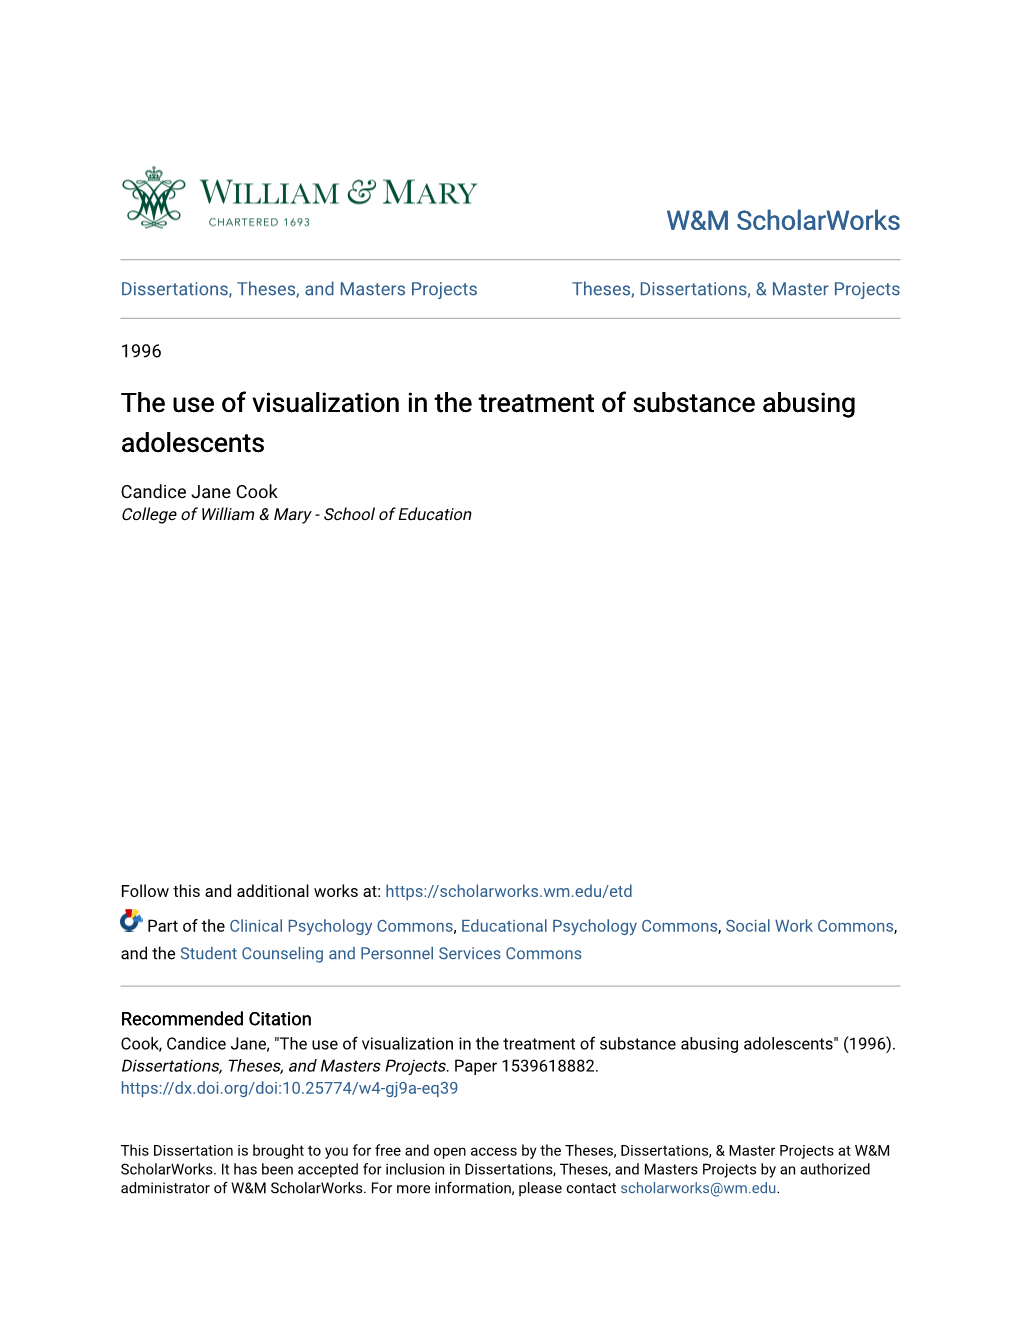 The Use of Visualization in the Treatment of Substance Abusing Adolescents